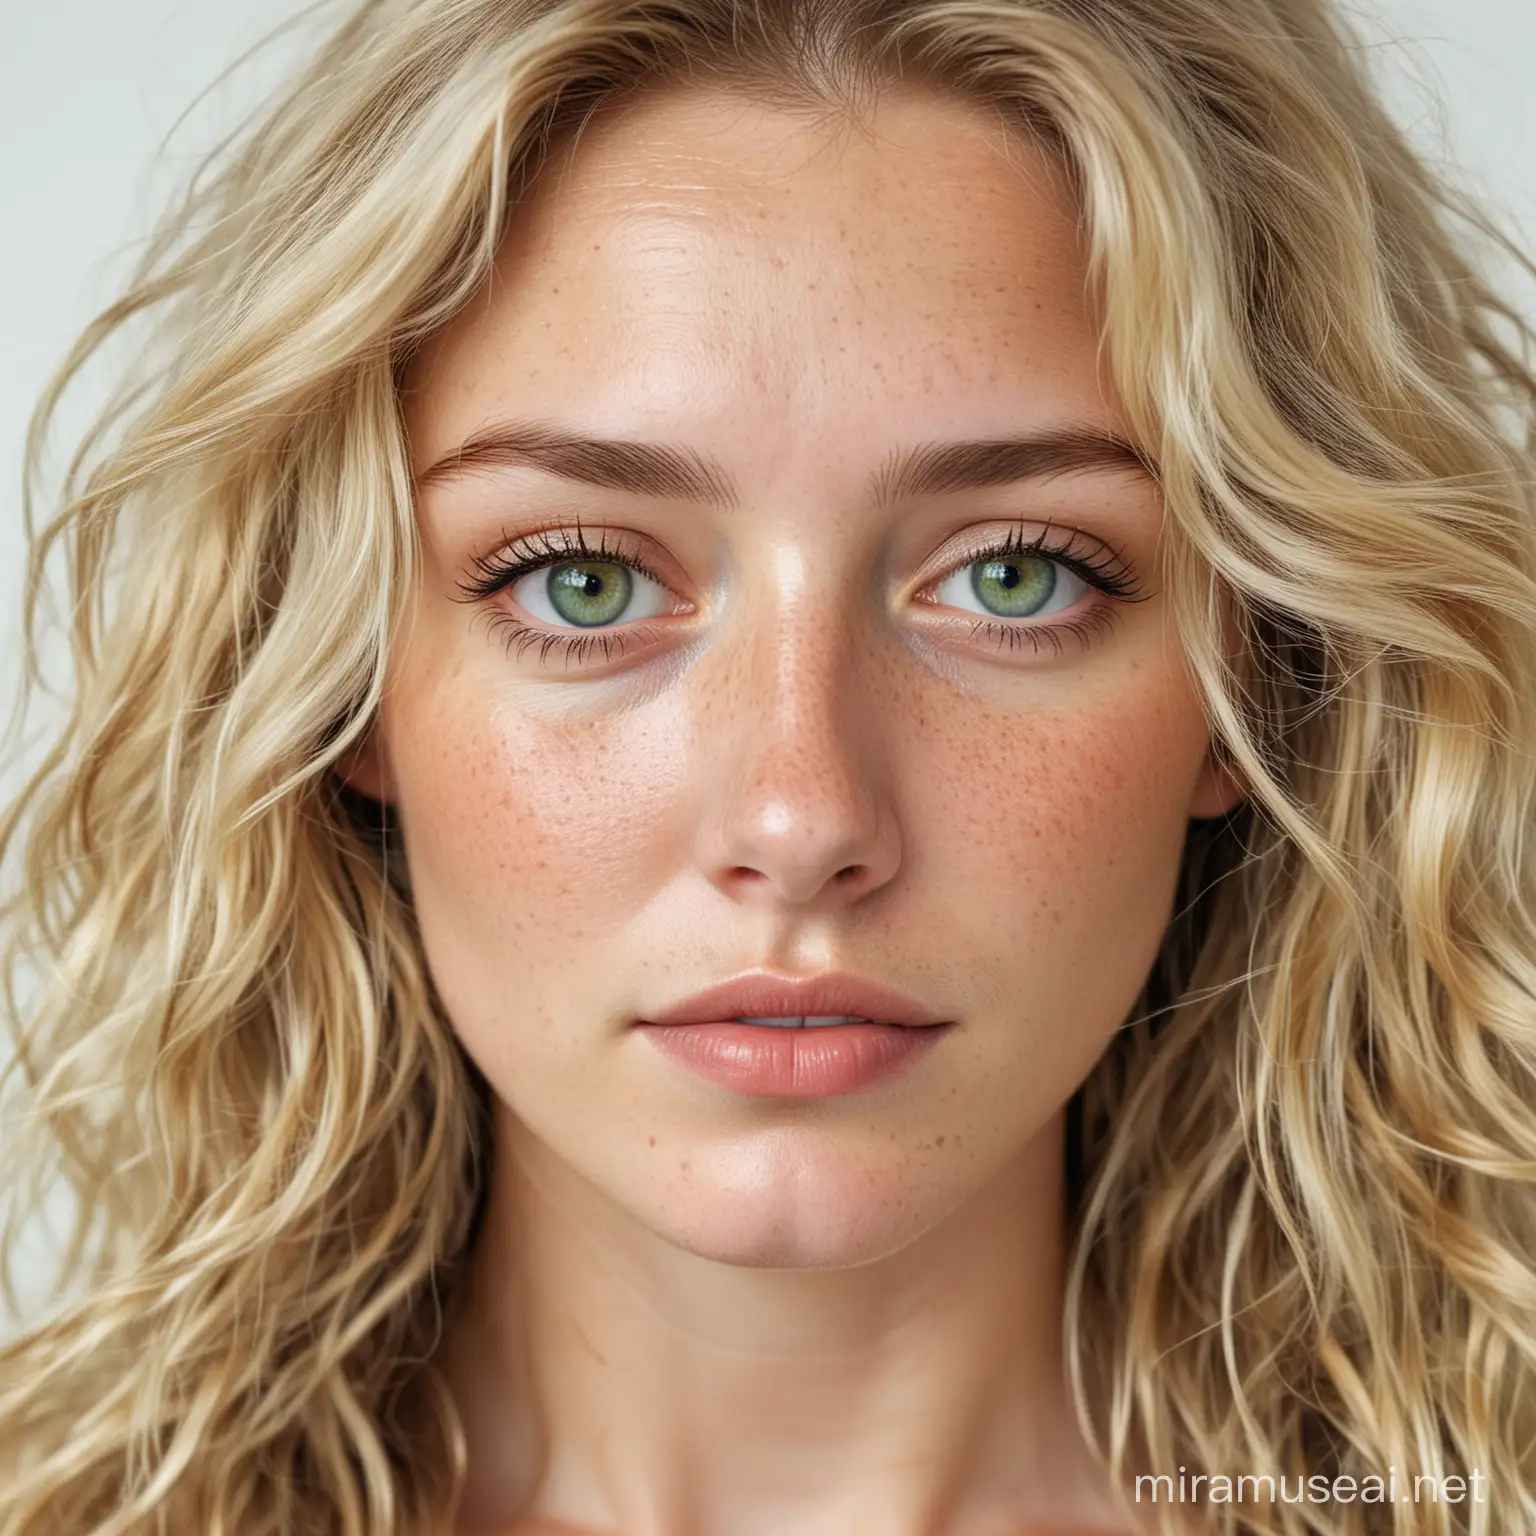 A beautiful blonde woman with long wavy hair and green eyes.  Give her just a smattering of freckles.